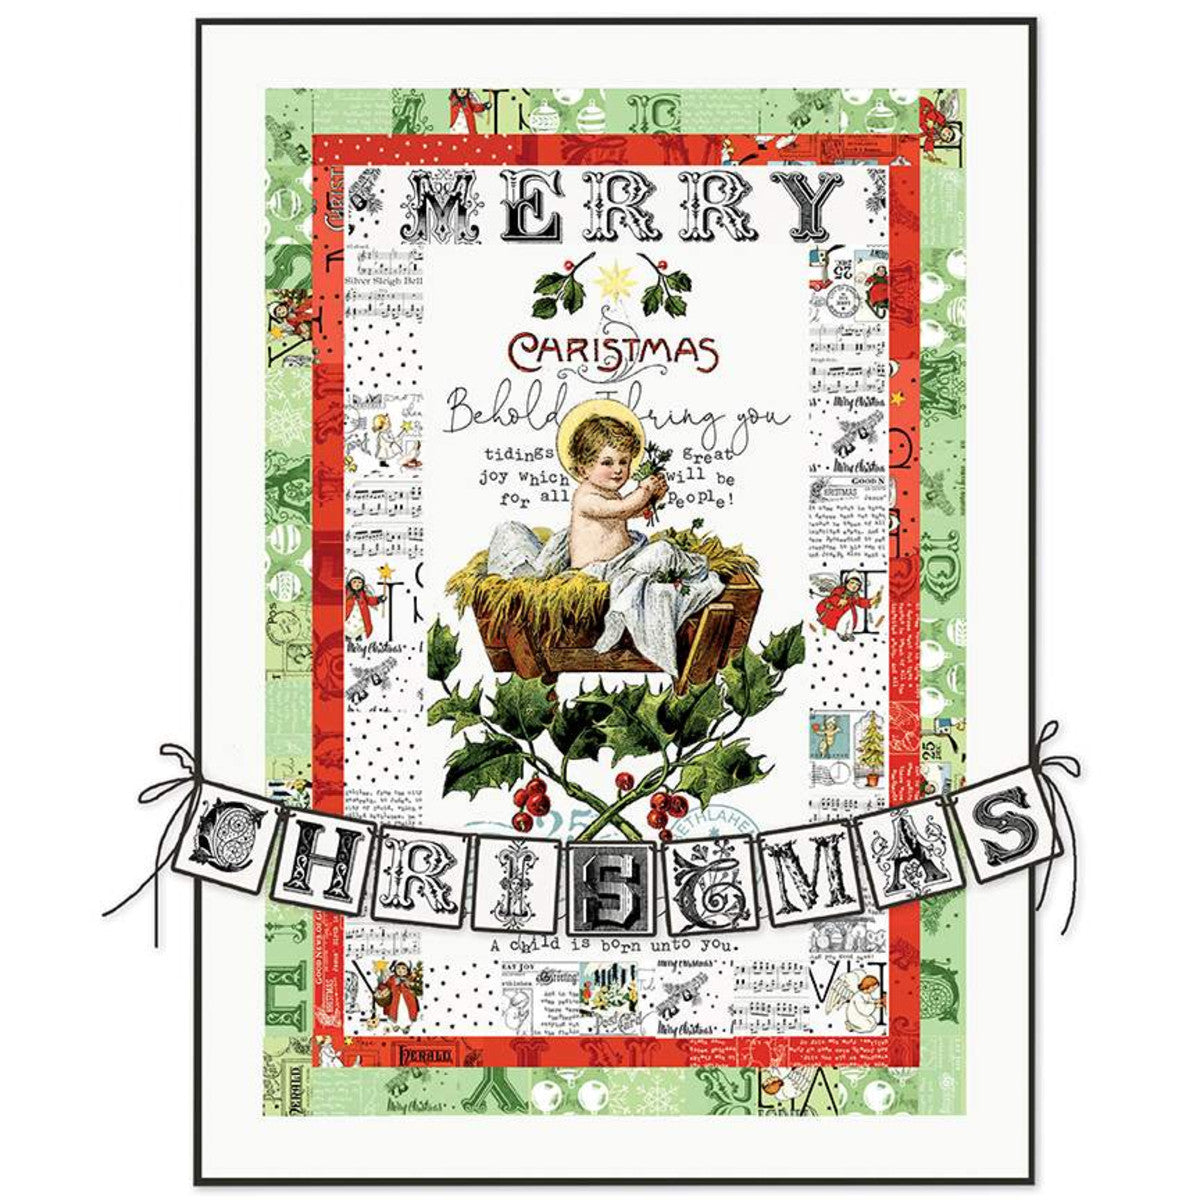 Tidings of Great Joy Panel Quilt Boxed Kit